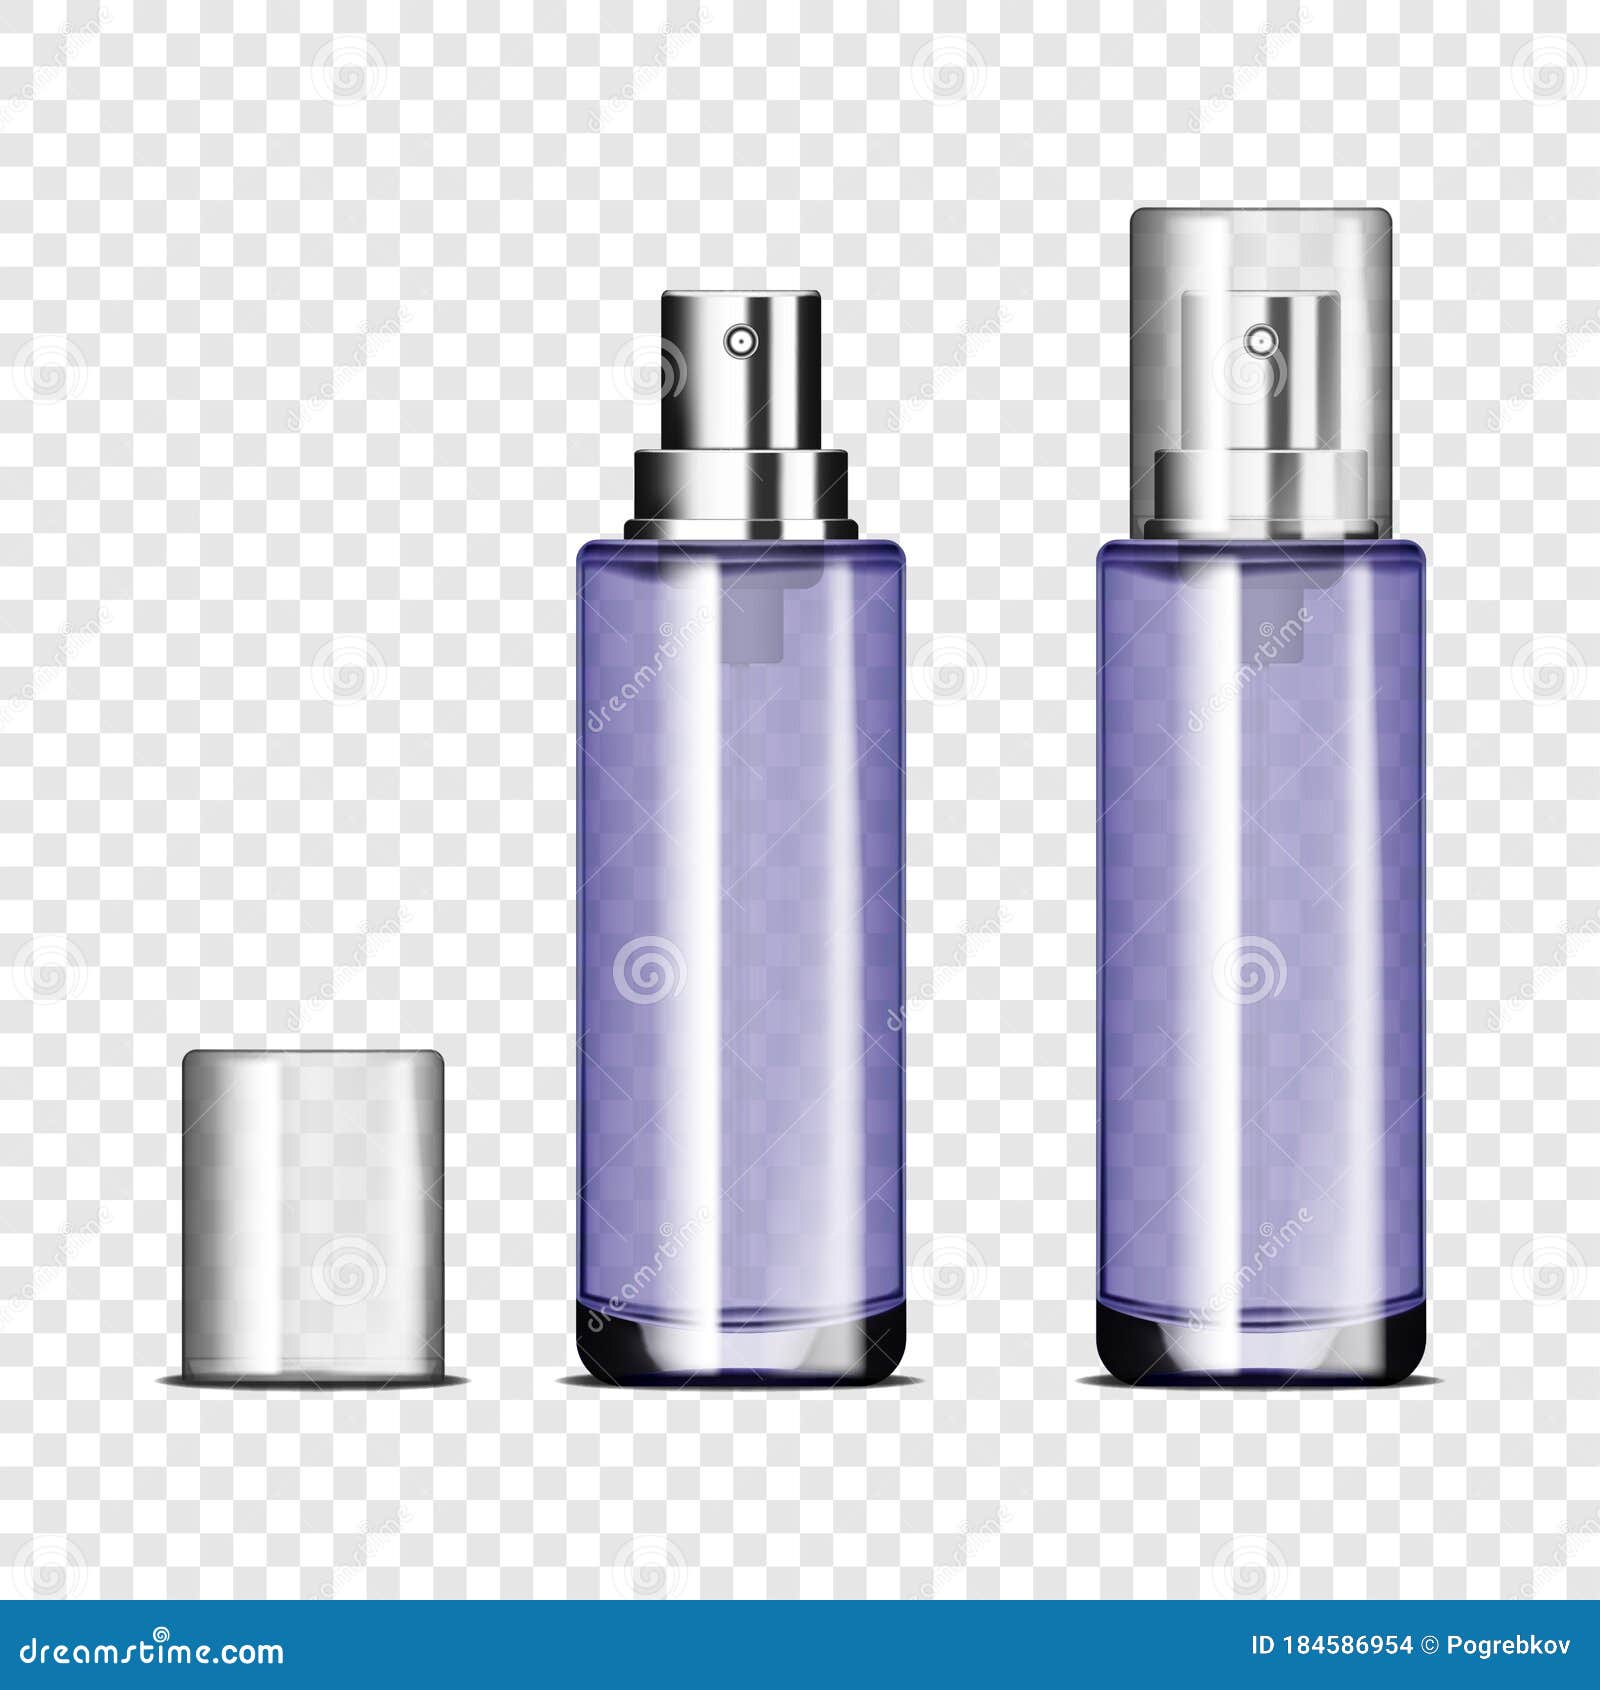 Download Glass Spray Bottle With Clear Cap On Transparent ...